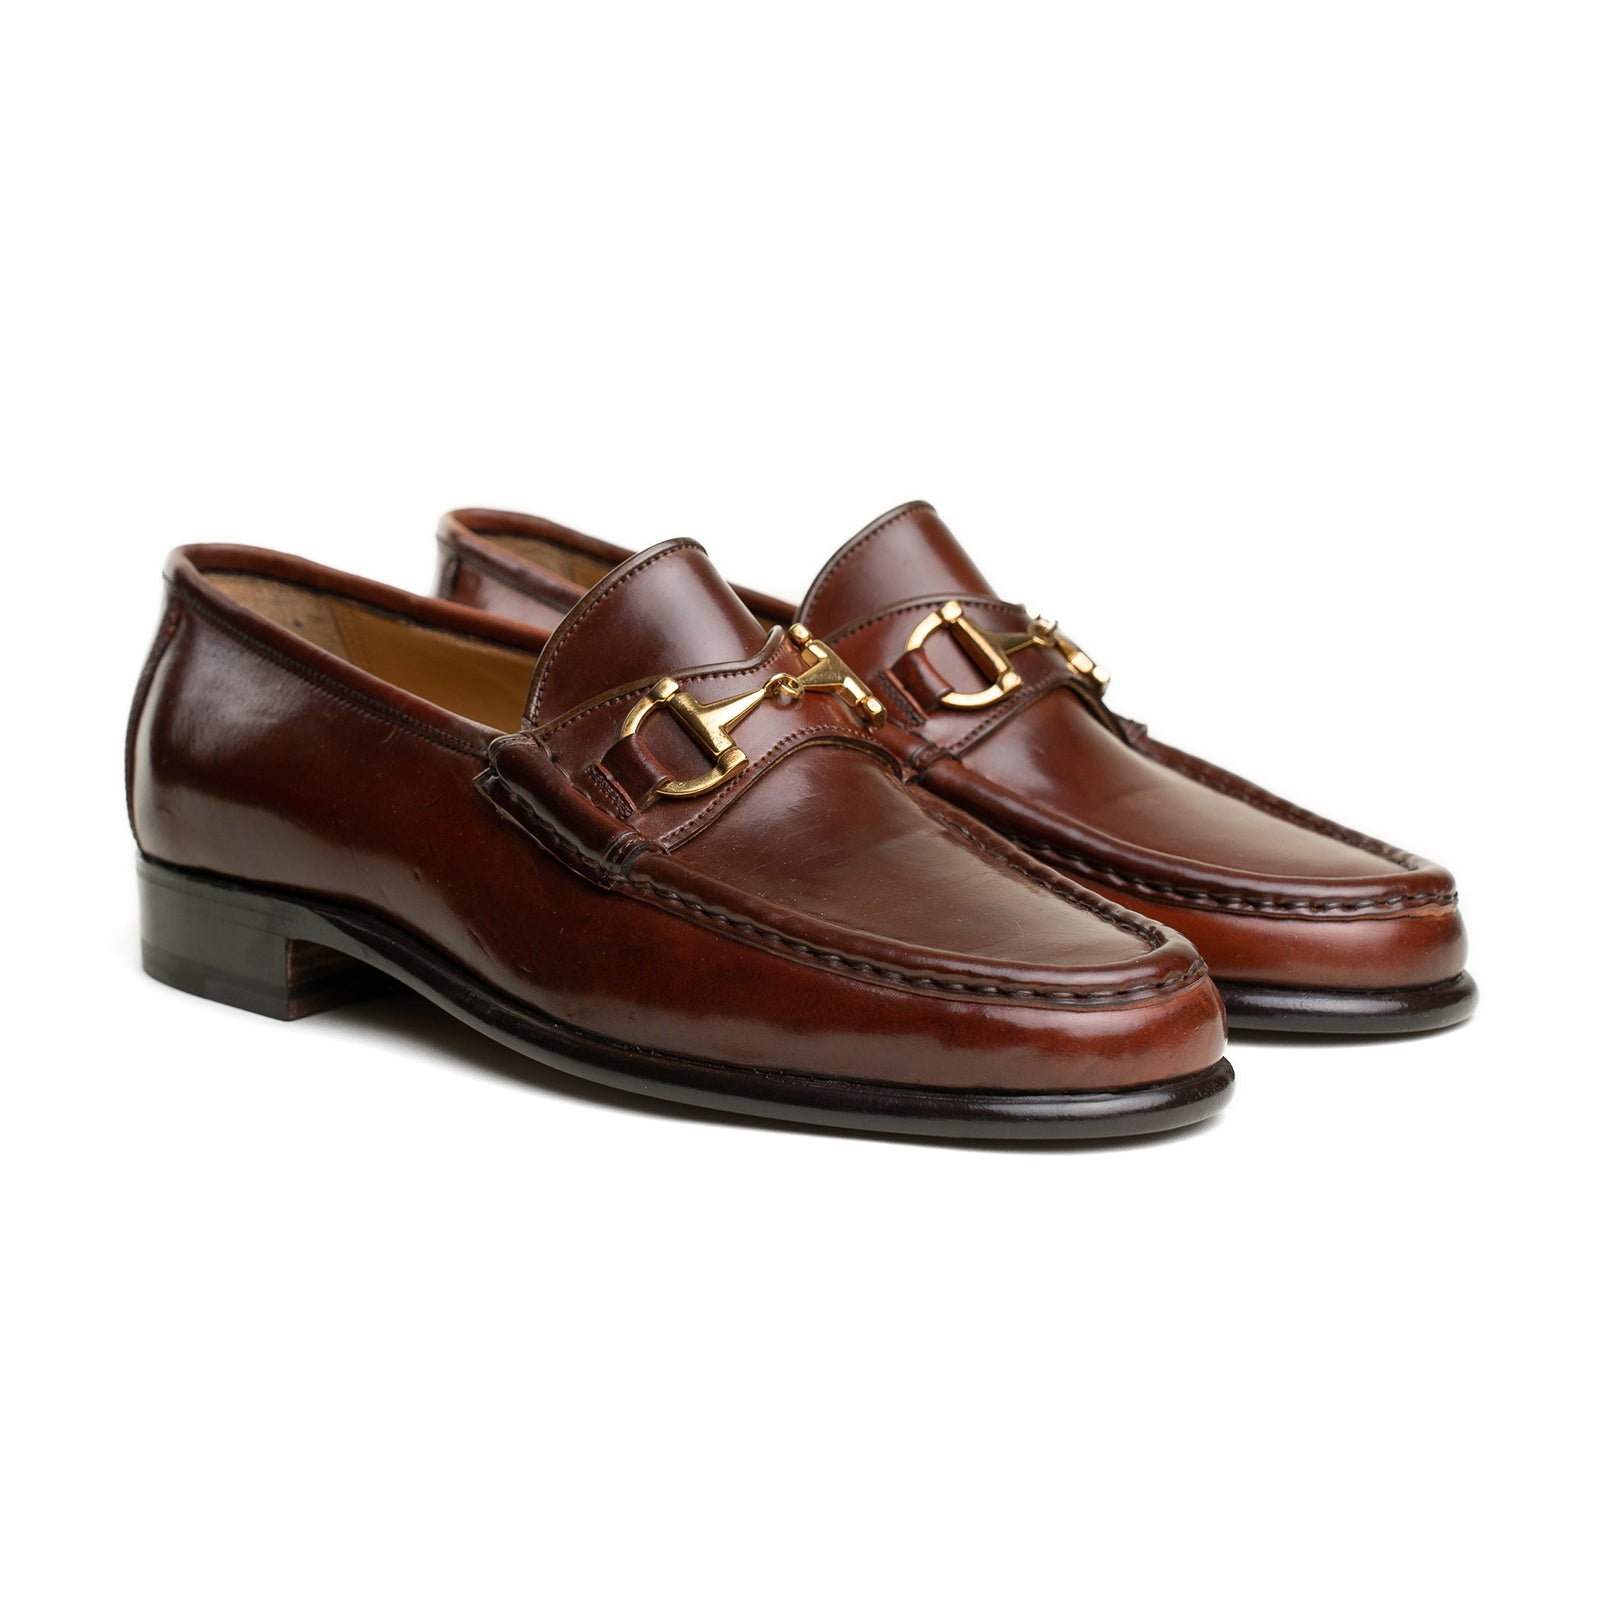 Style 2695 - Horween Cordovan Col. 4